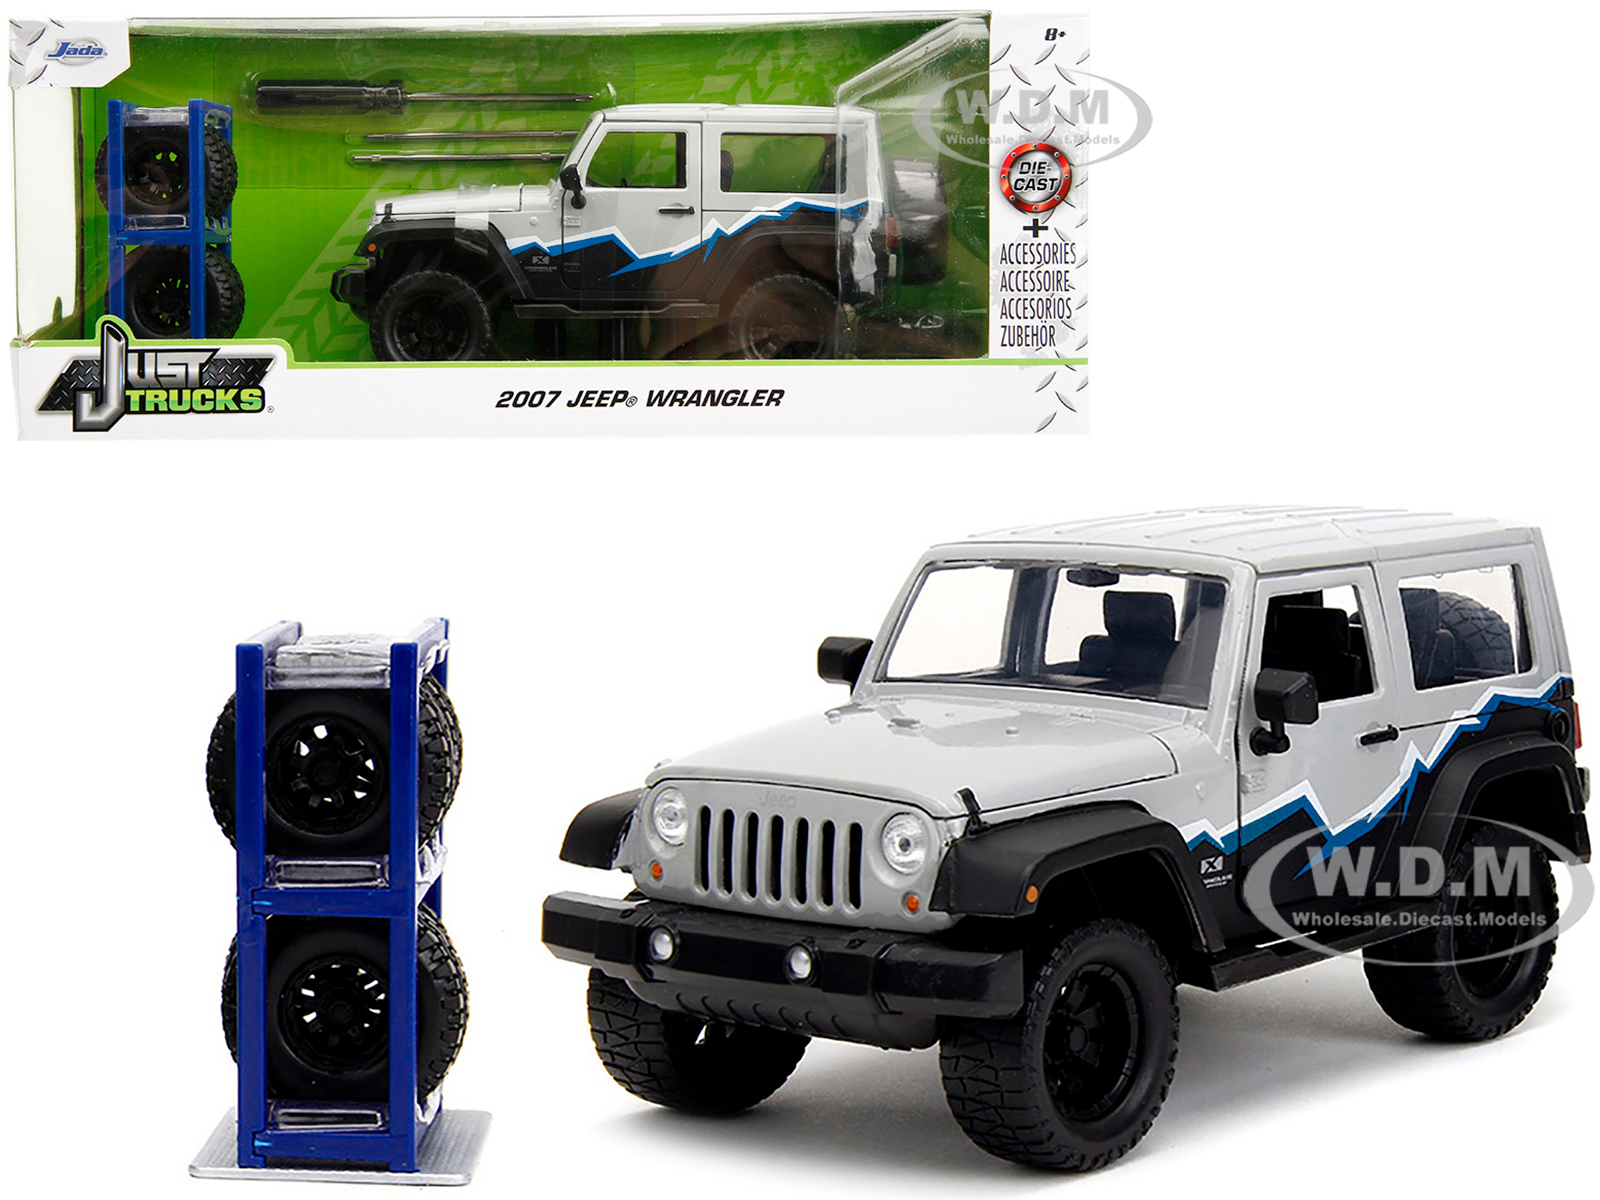 2007 Jeep Wrangler Gray and Black with Blue and White Stripes with Extra Wheels Just Trucks Series 1/24 Diecast Model Car by Jada